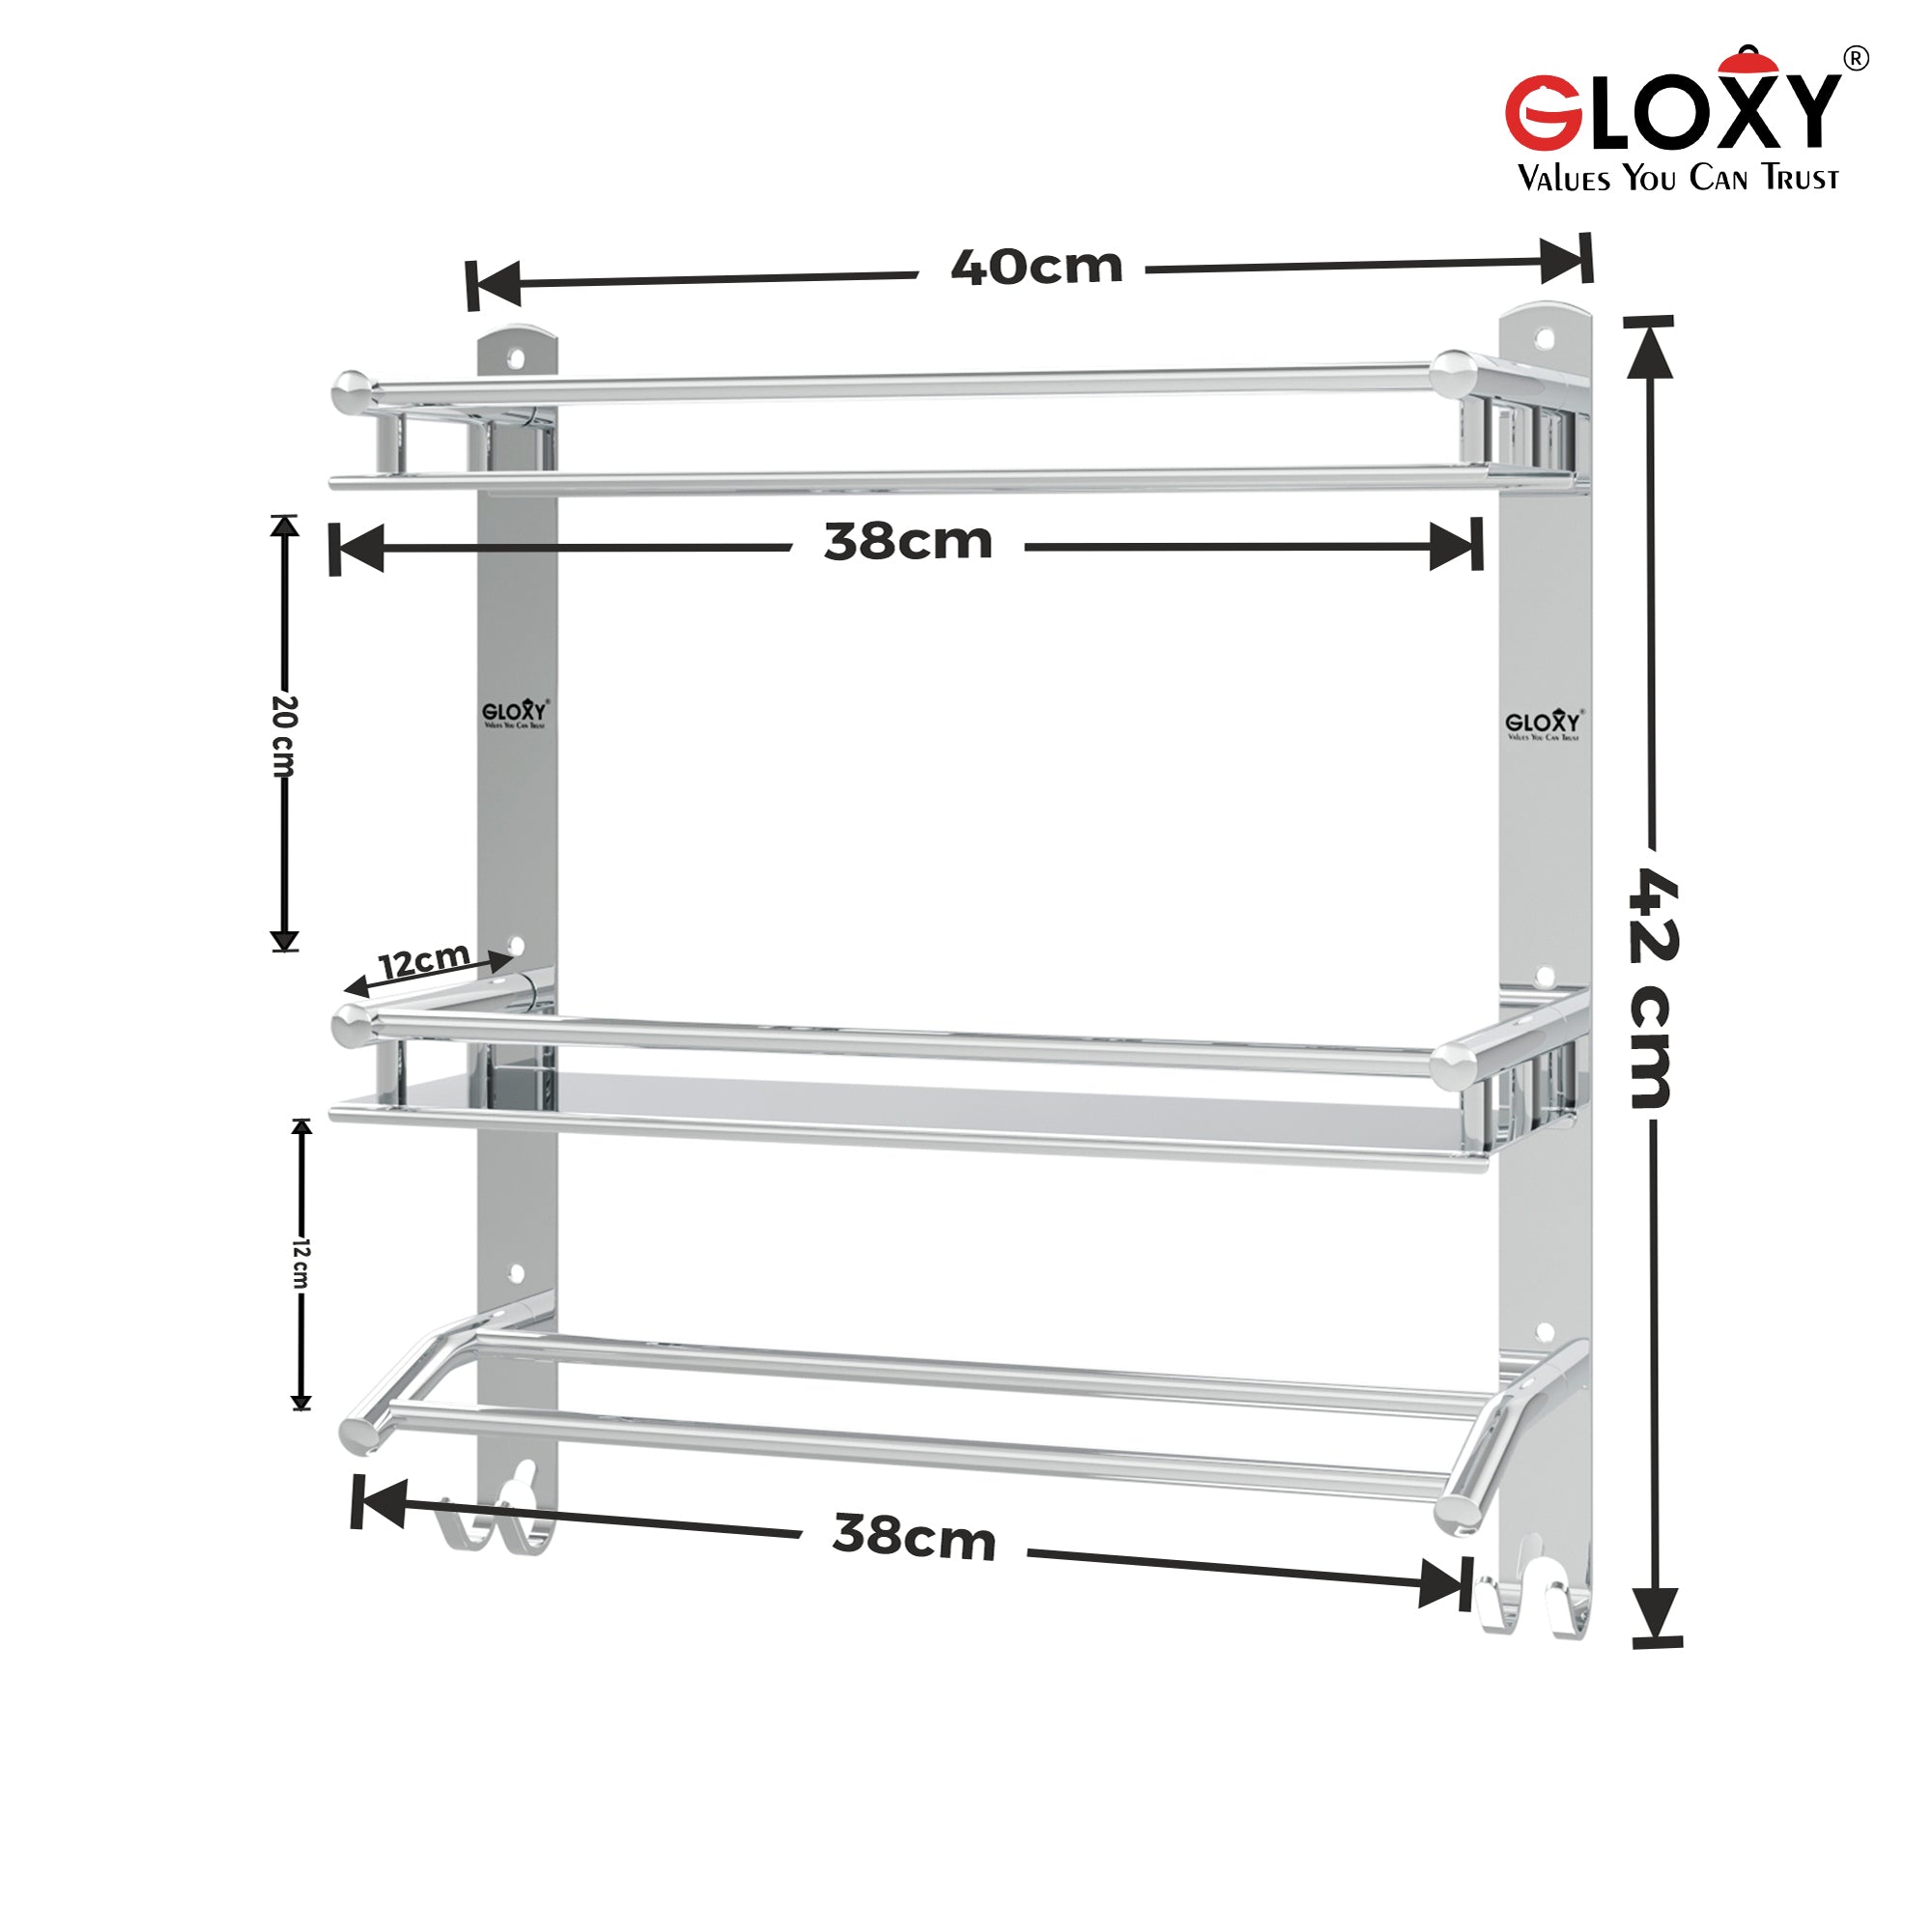 Stainless Steel Double Layer Shelf with Towel Holder